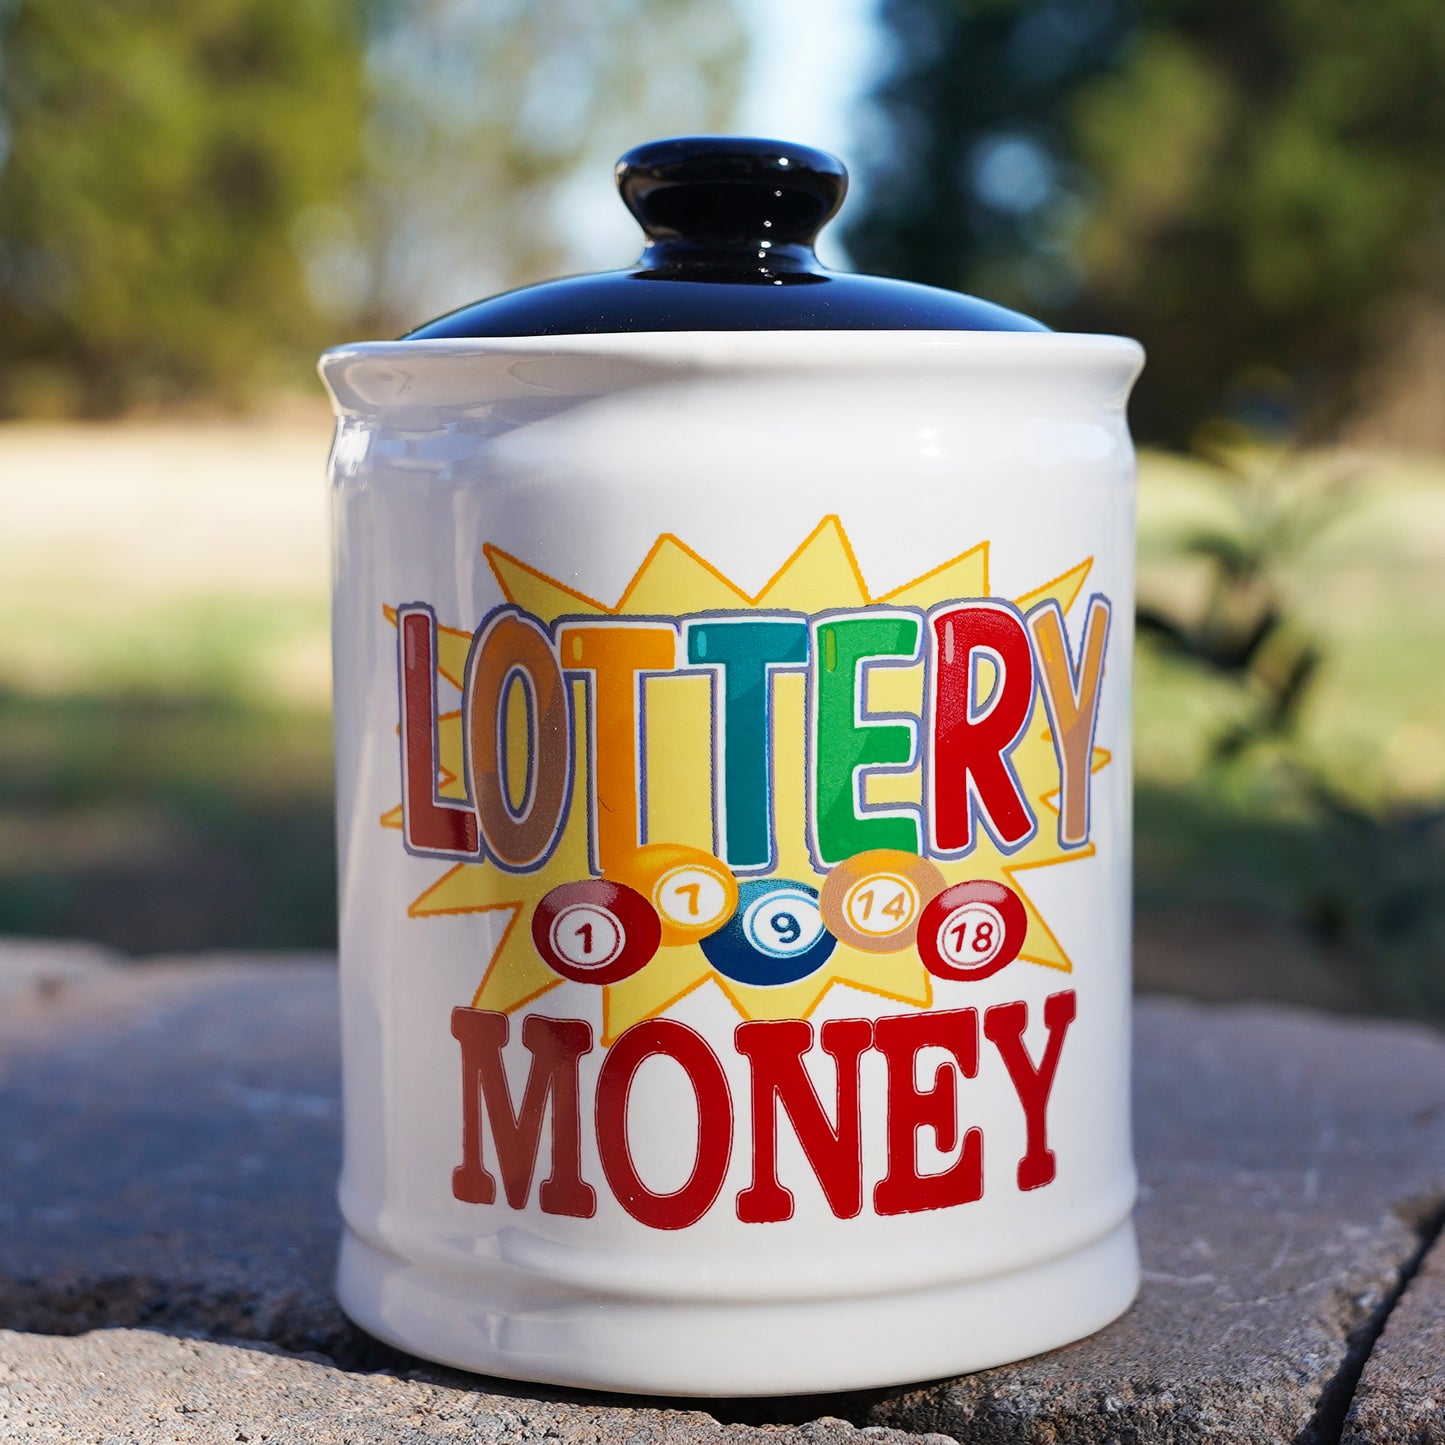 Cottage Creek Lottery Money Piggy Bank, Ceramic, 6", Multicolored Lottery Gift